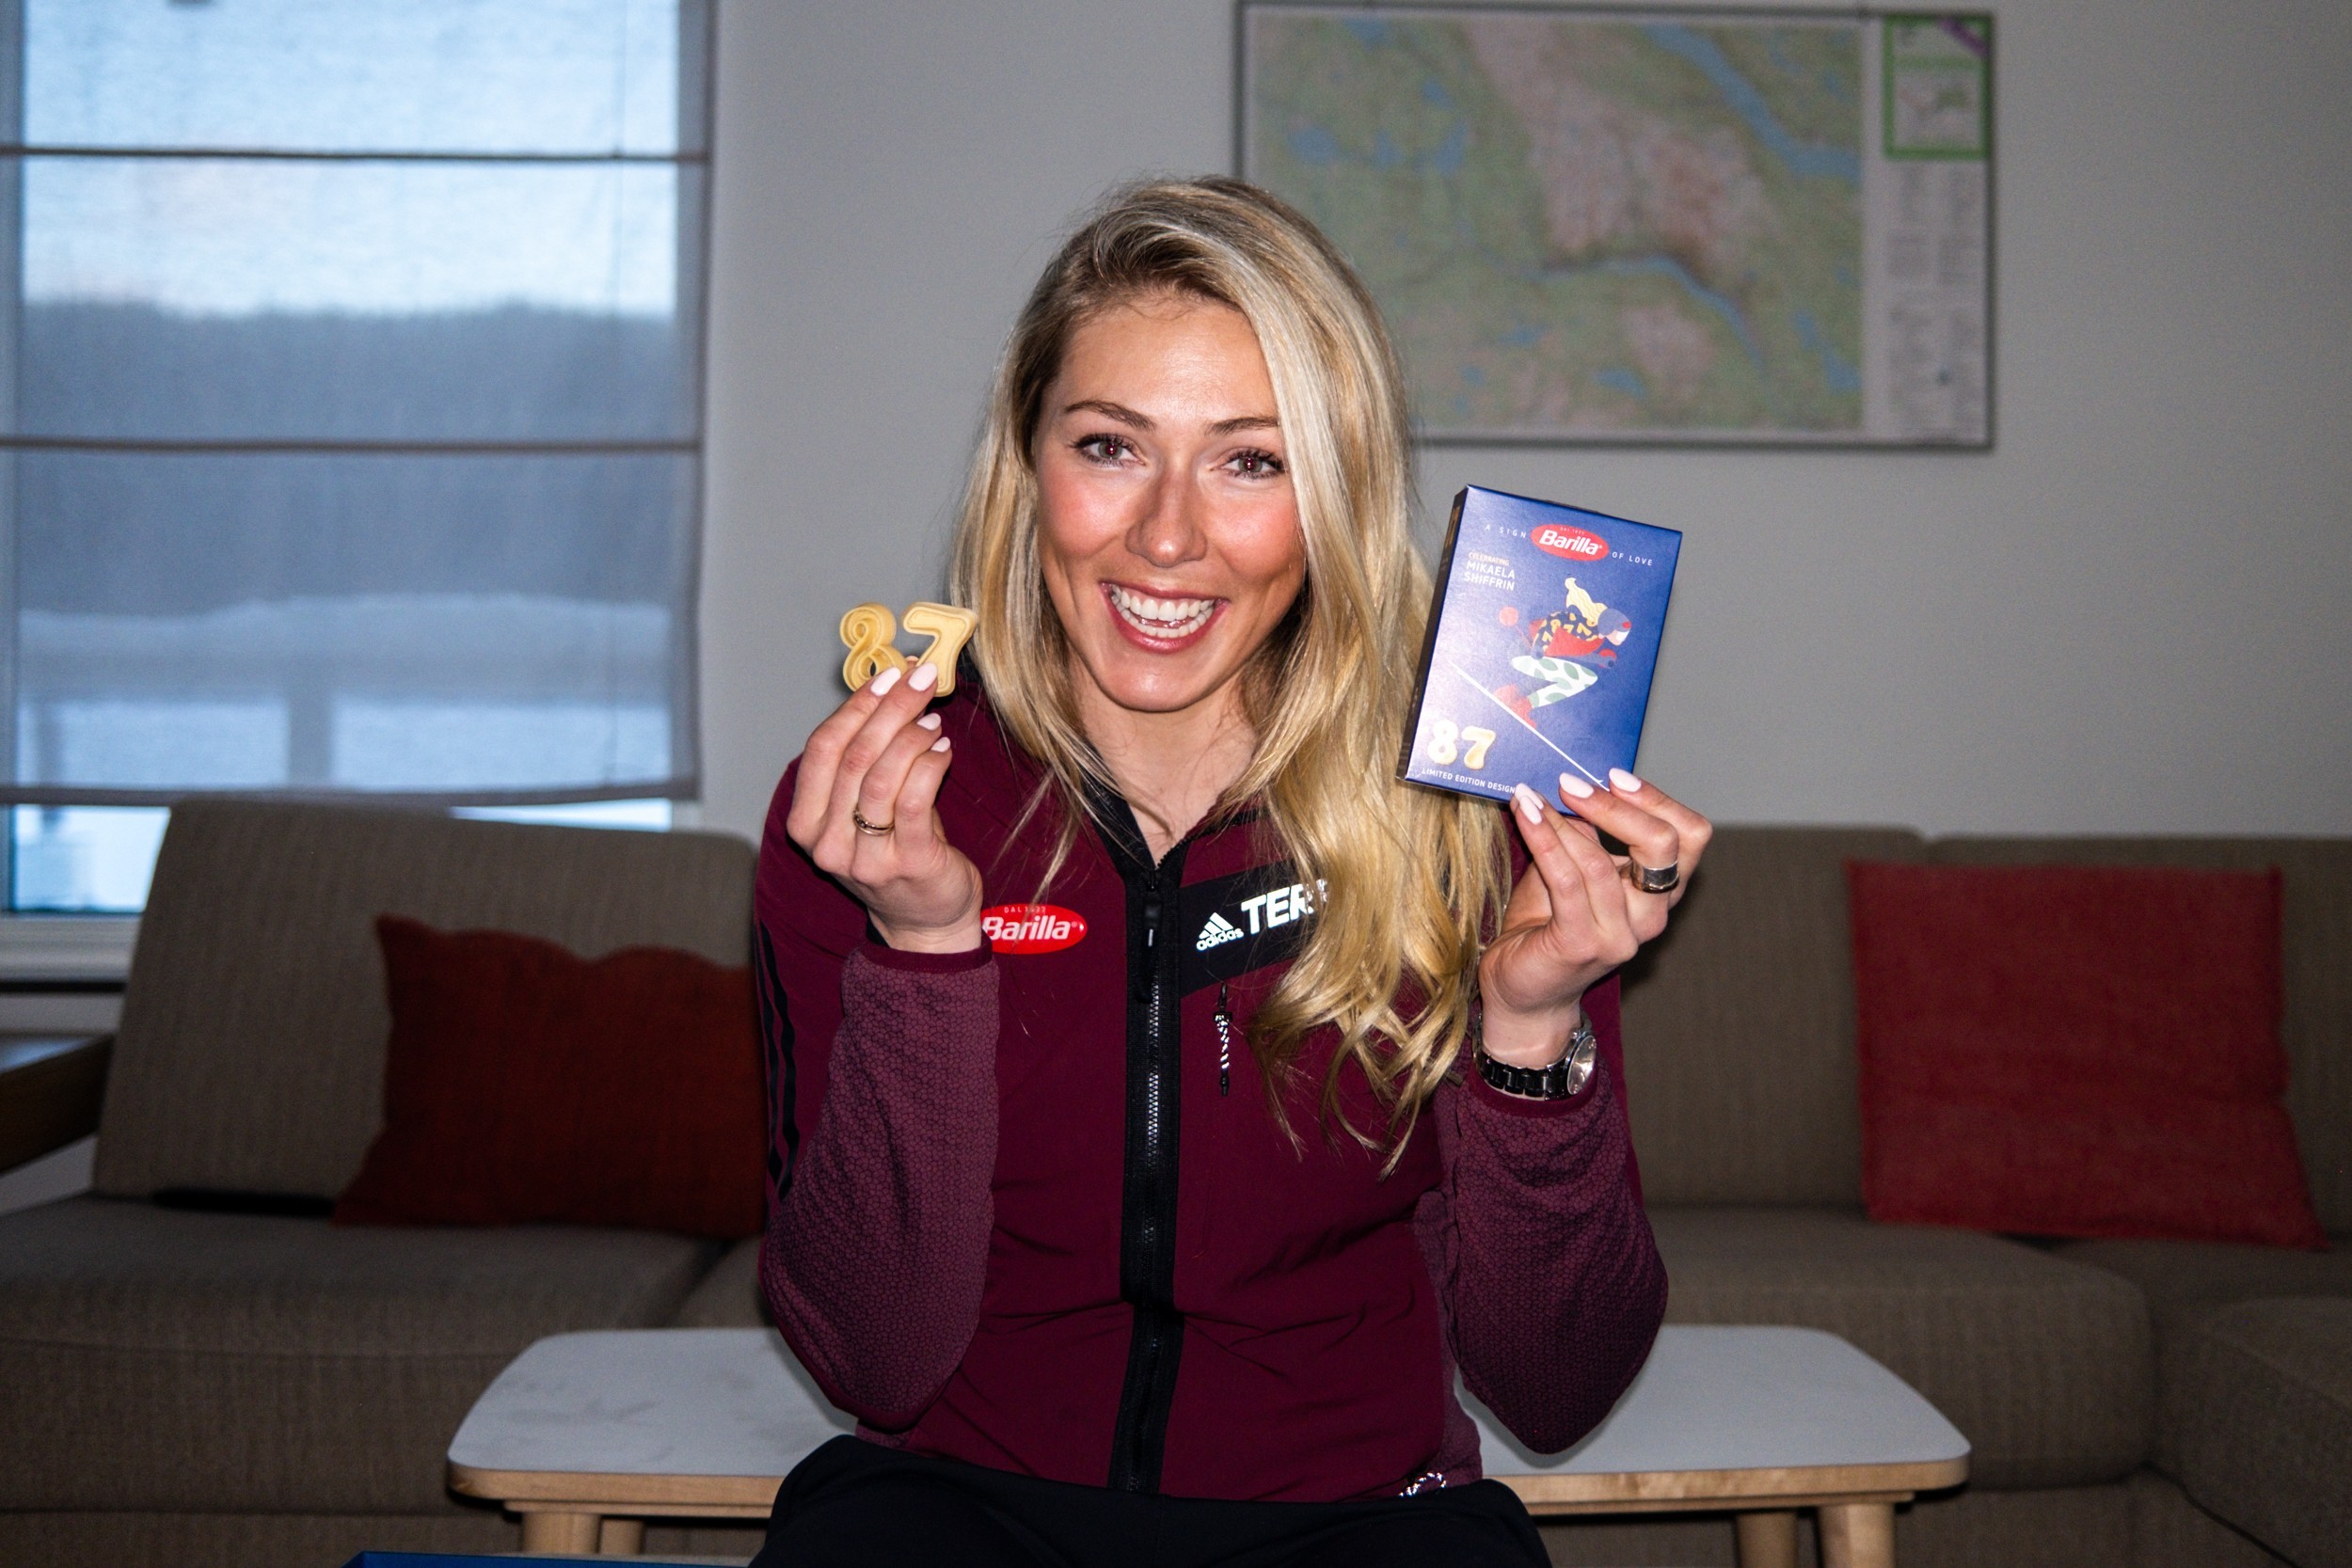 Barilla & Mikaela Shiffrin: Greatness starts with a great recipe - Pack No. 4